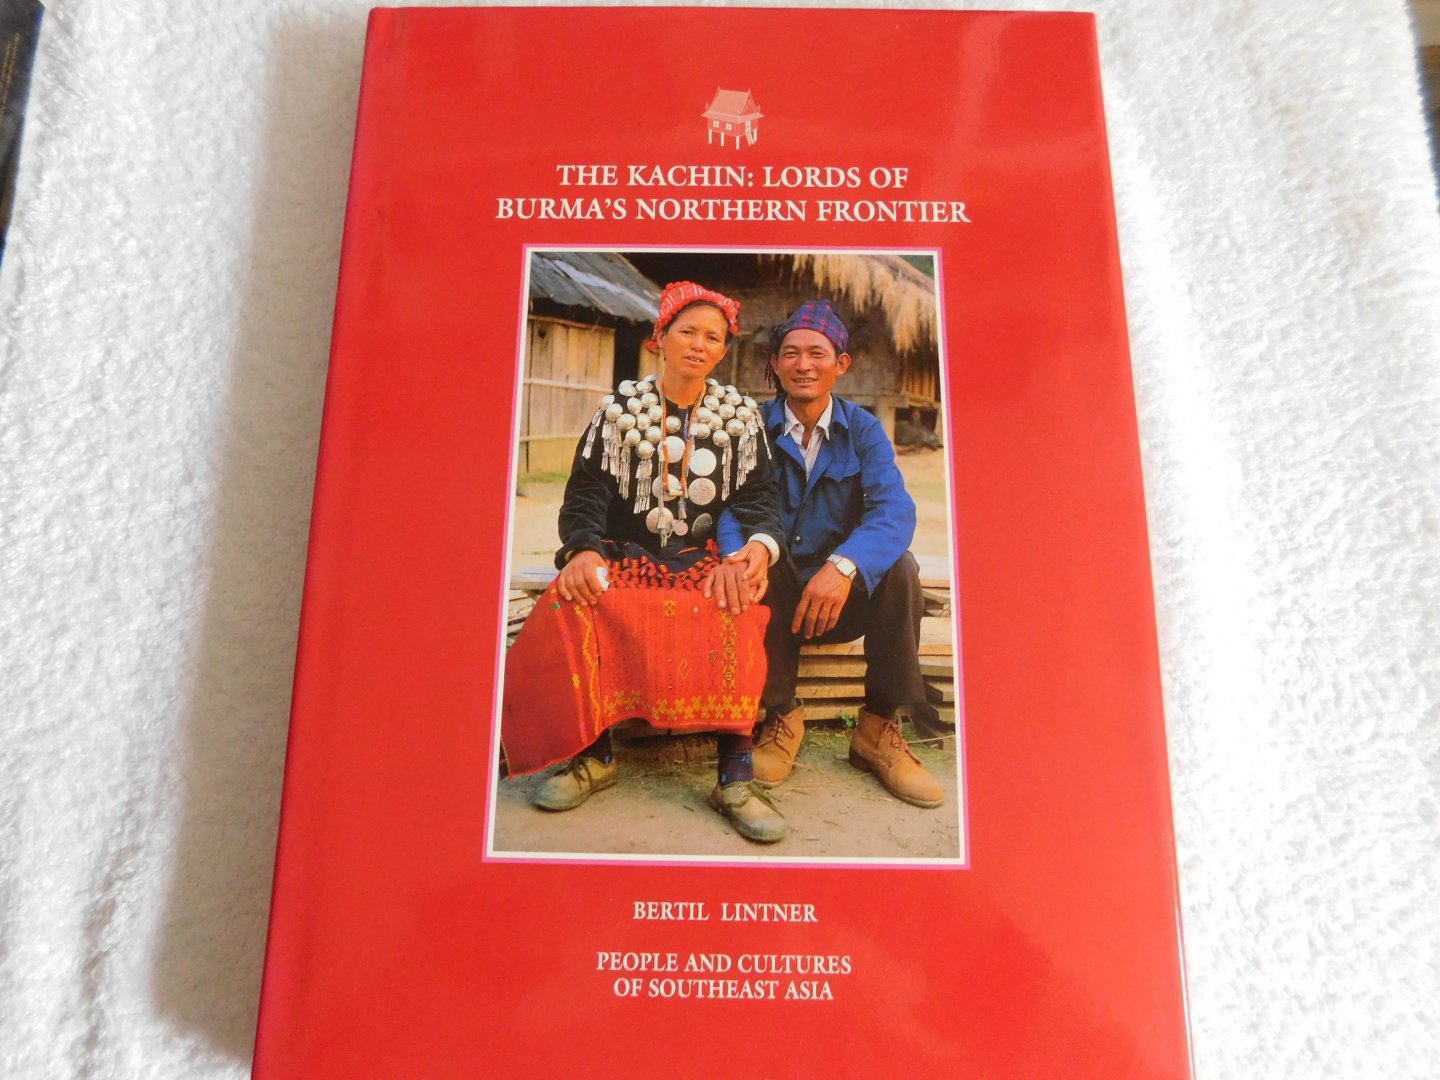 Bertil Lintner - The Kachin: Lords of burma's northern frontier